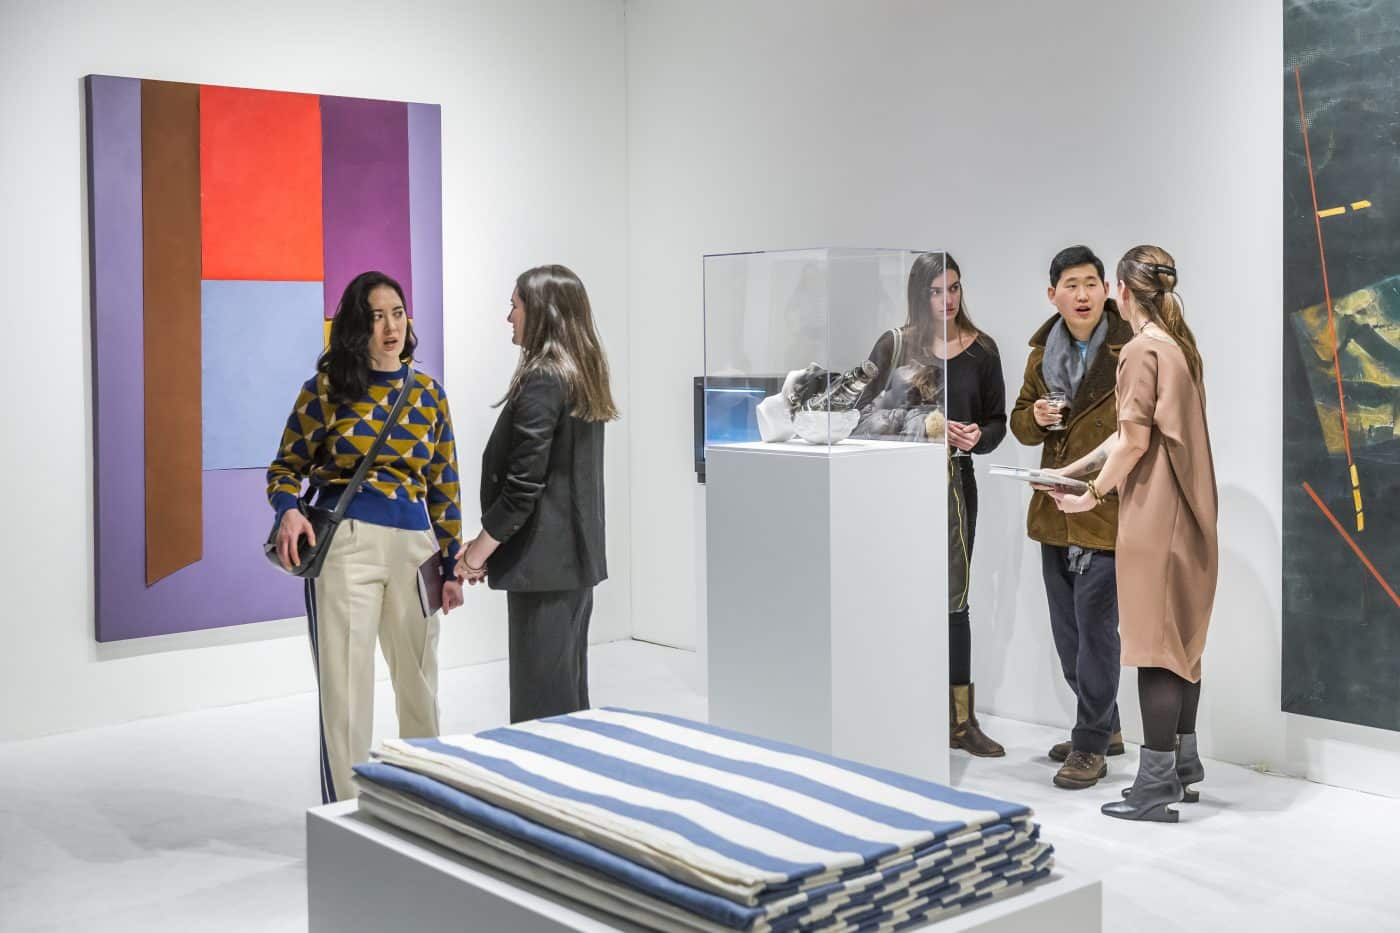 ADAA Art Show’s 2019 gala preview at New York's Park Avenue Armory